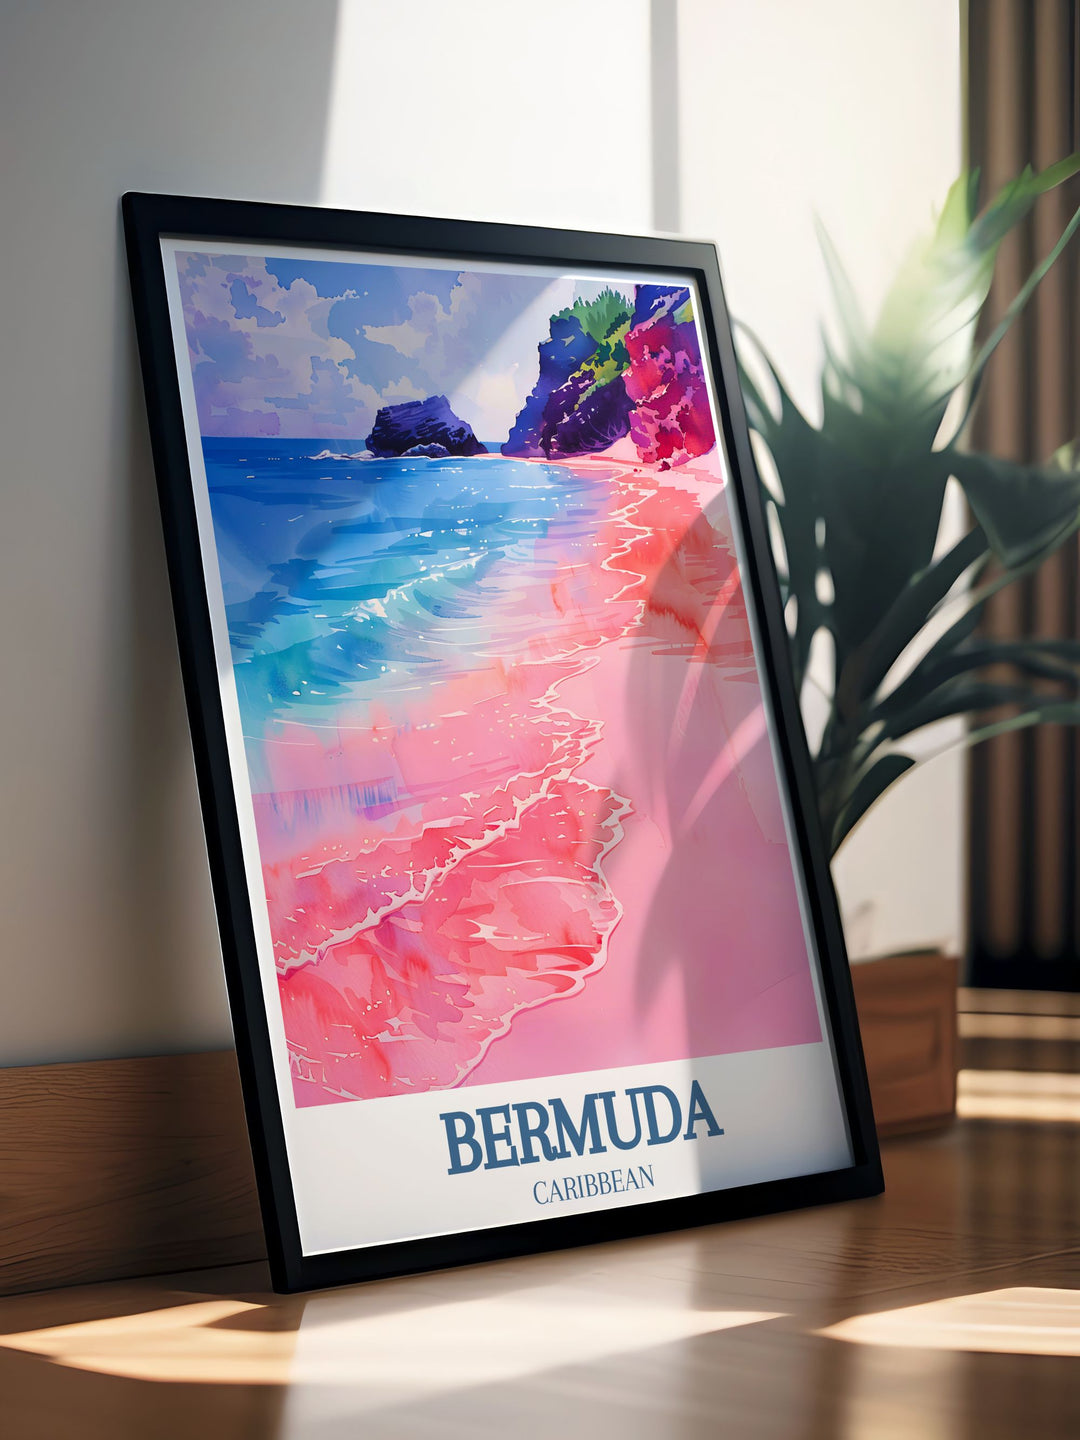 High quality Bermuda painting of Horseshoe Bay Beach and Warwick Long Bay, capturing the stunning coastal scenery and tranquil waters of this beautiful island. Ideal for art lovers who appreciate both nature and travel.